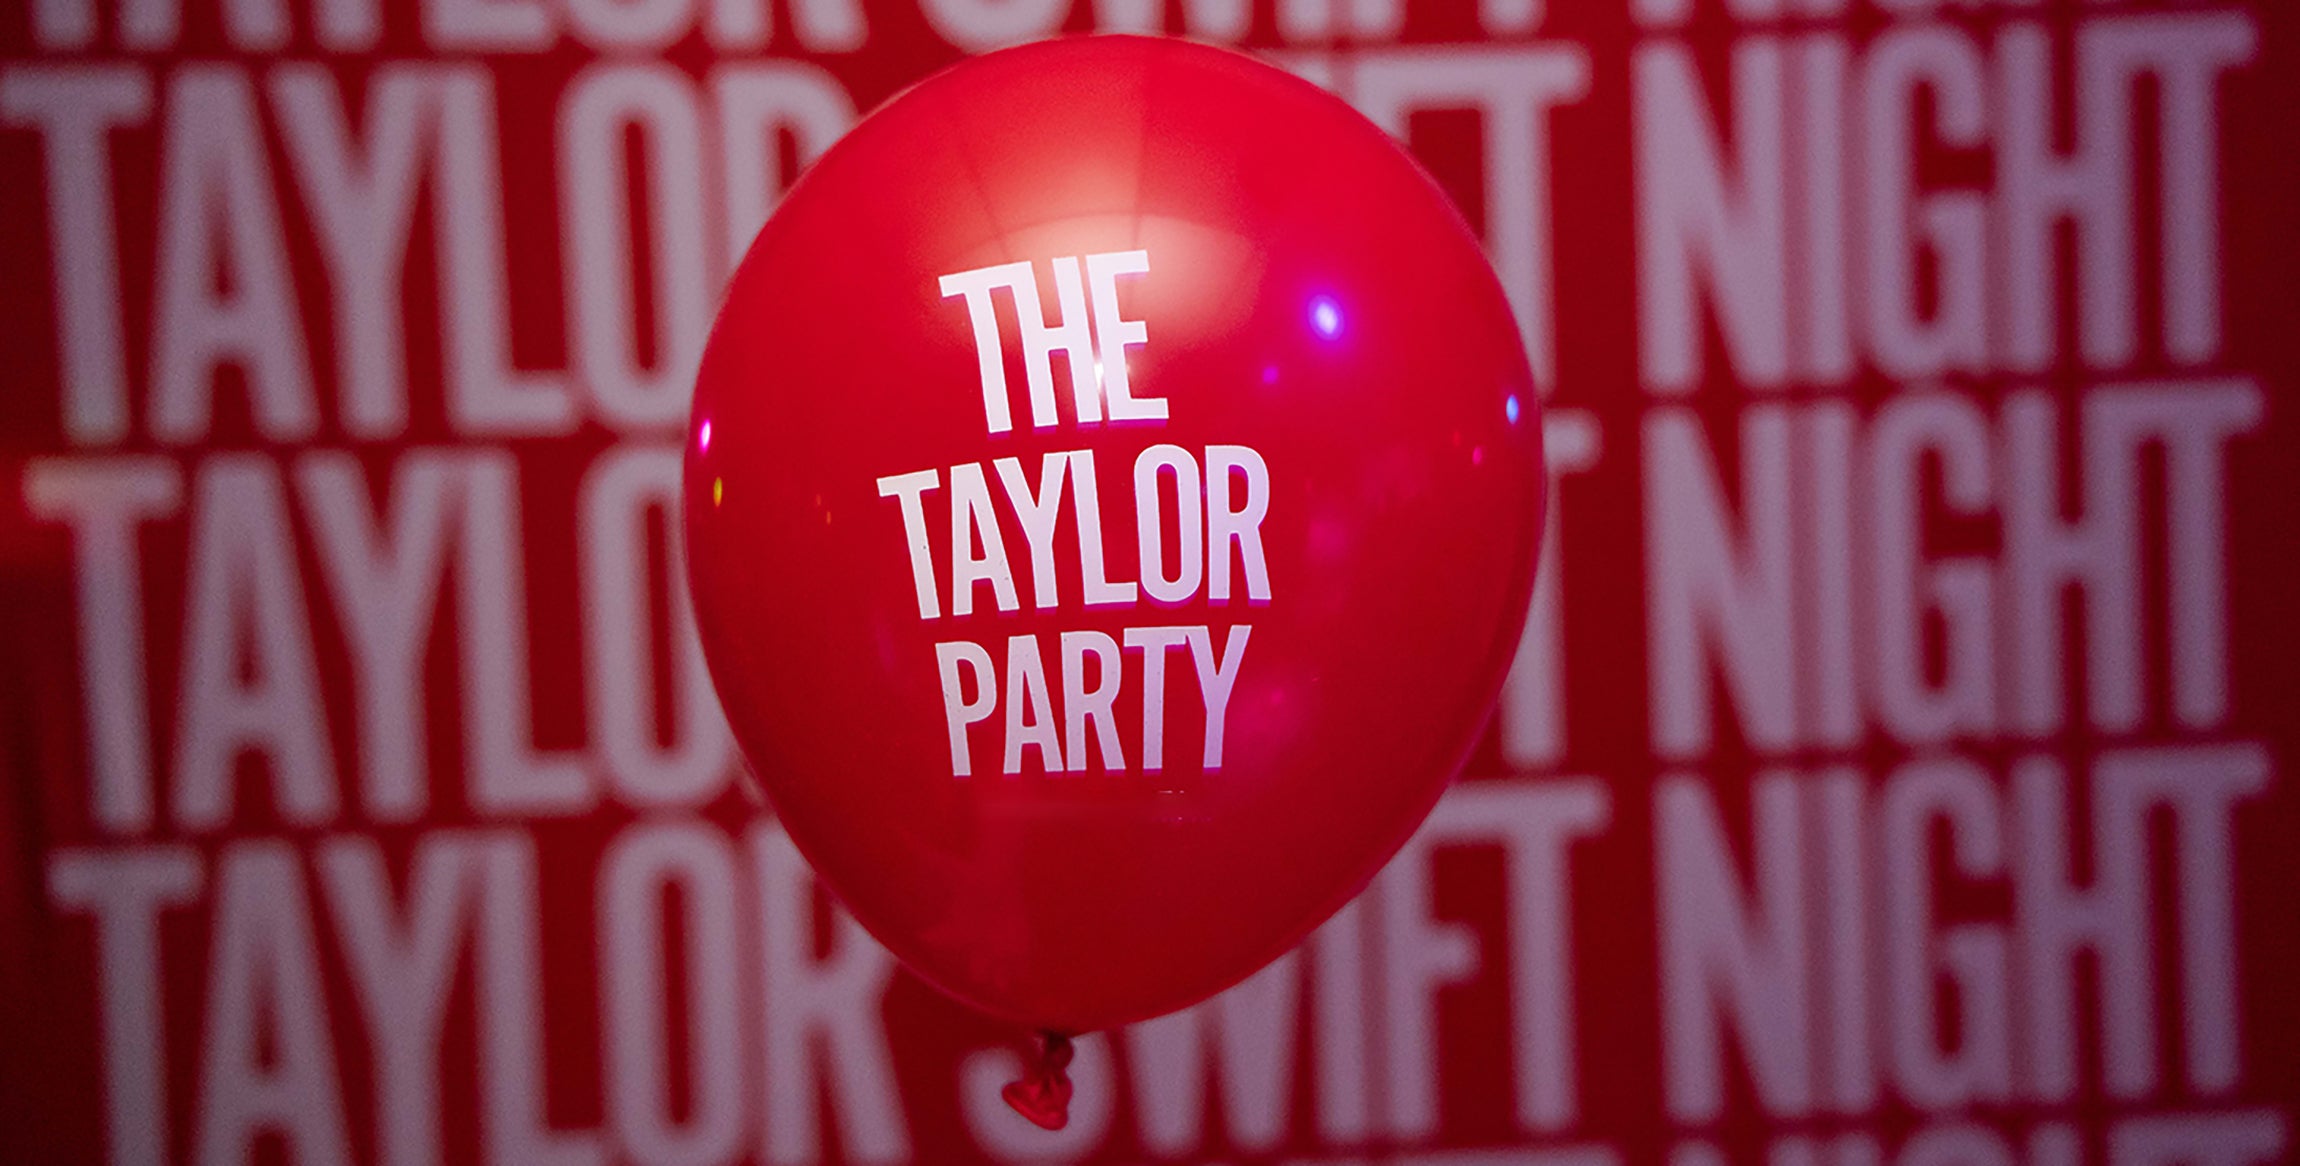 The Taylor Party: Taylor Swift Night - 18+ Only free presale code for concert tickets in Cincinnati, OH (Bogart's)